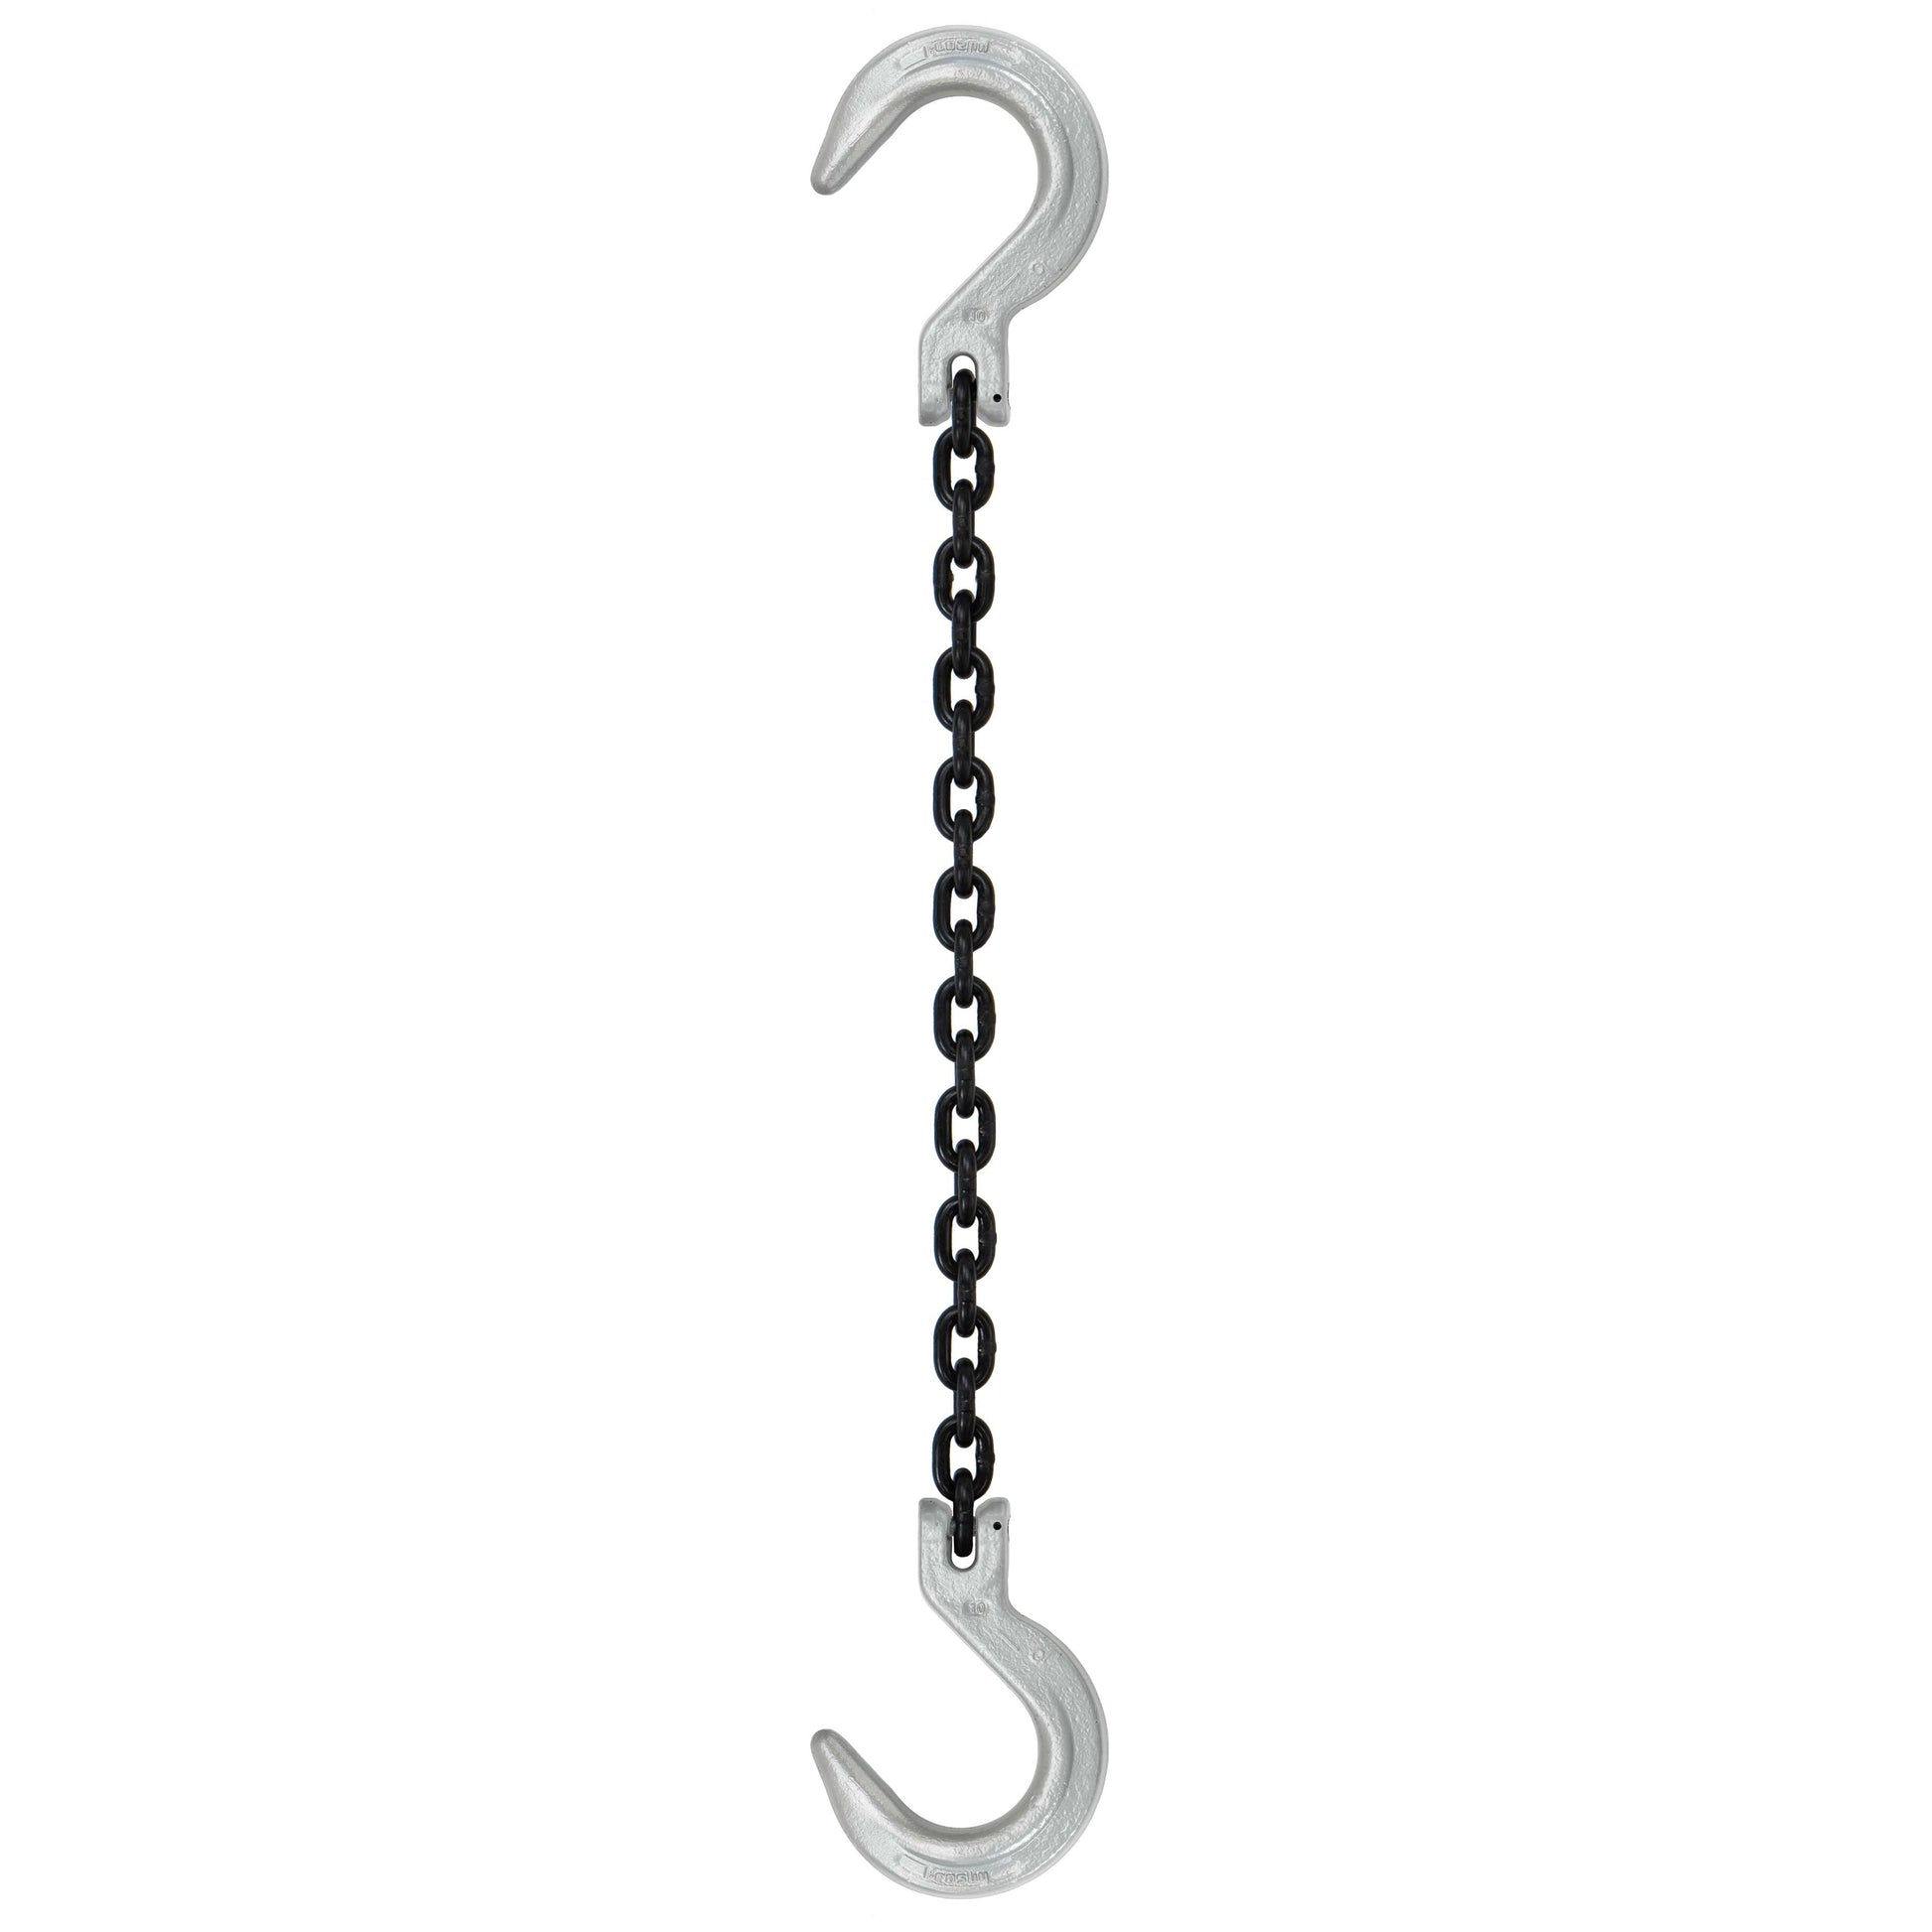 38 inch x 12 foot Domestic Single Leg Chain Sling w Crosby Foundry & Foundry Hooks Grade 100 image 1 of 2